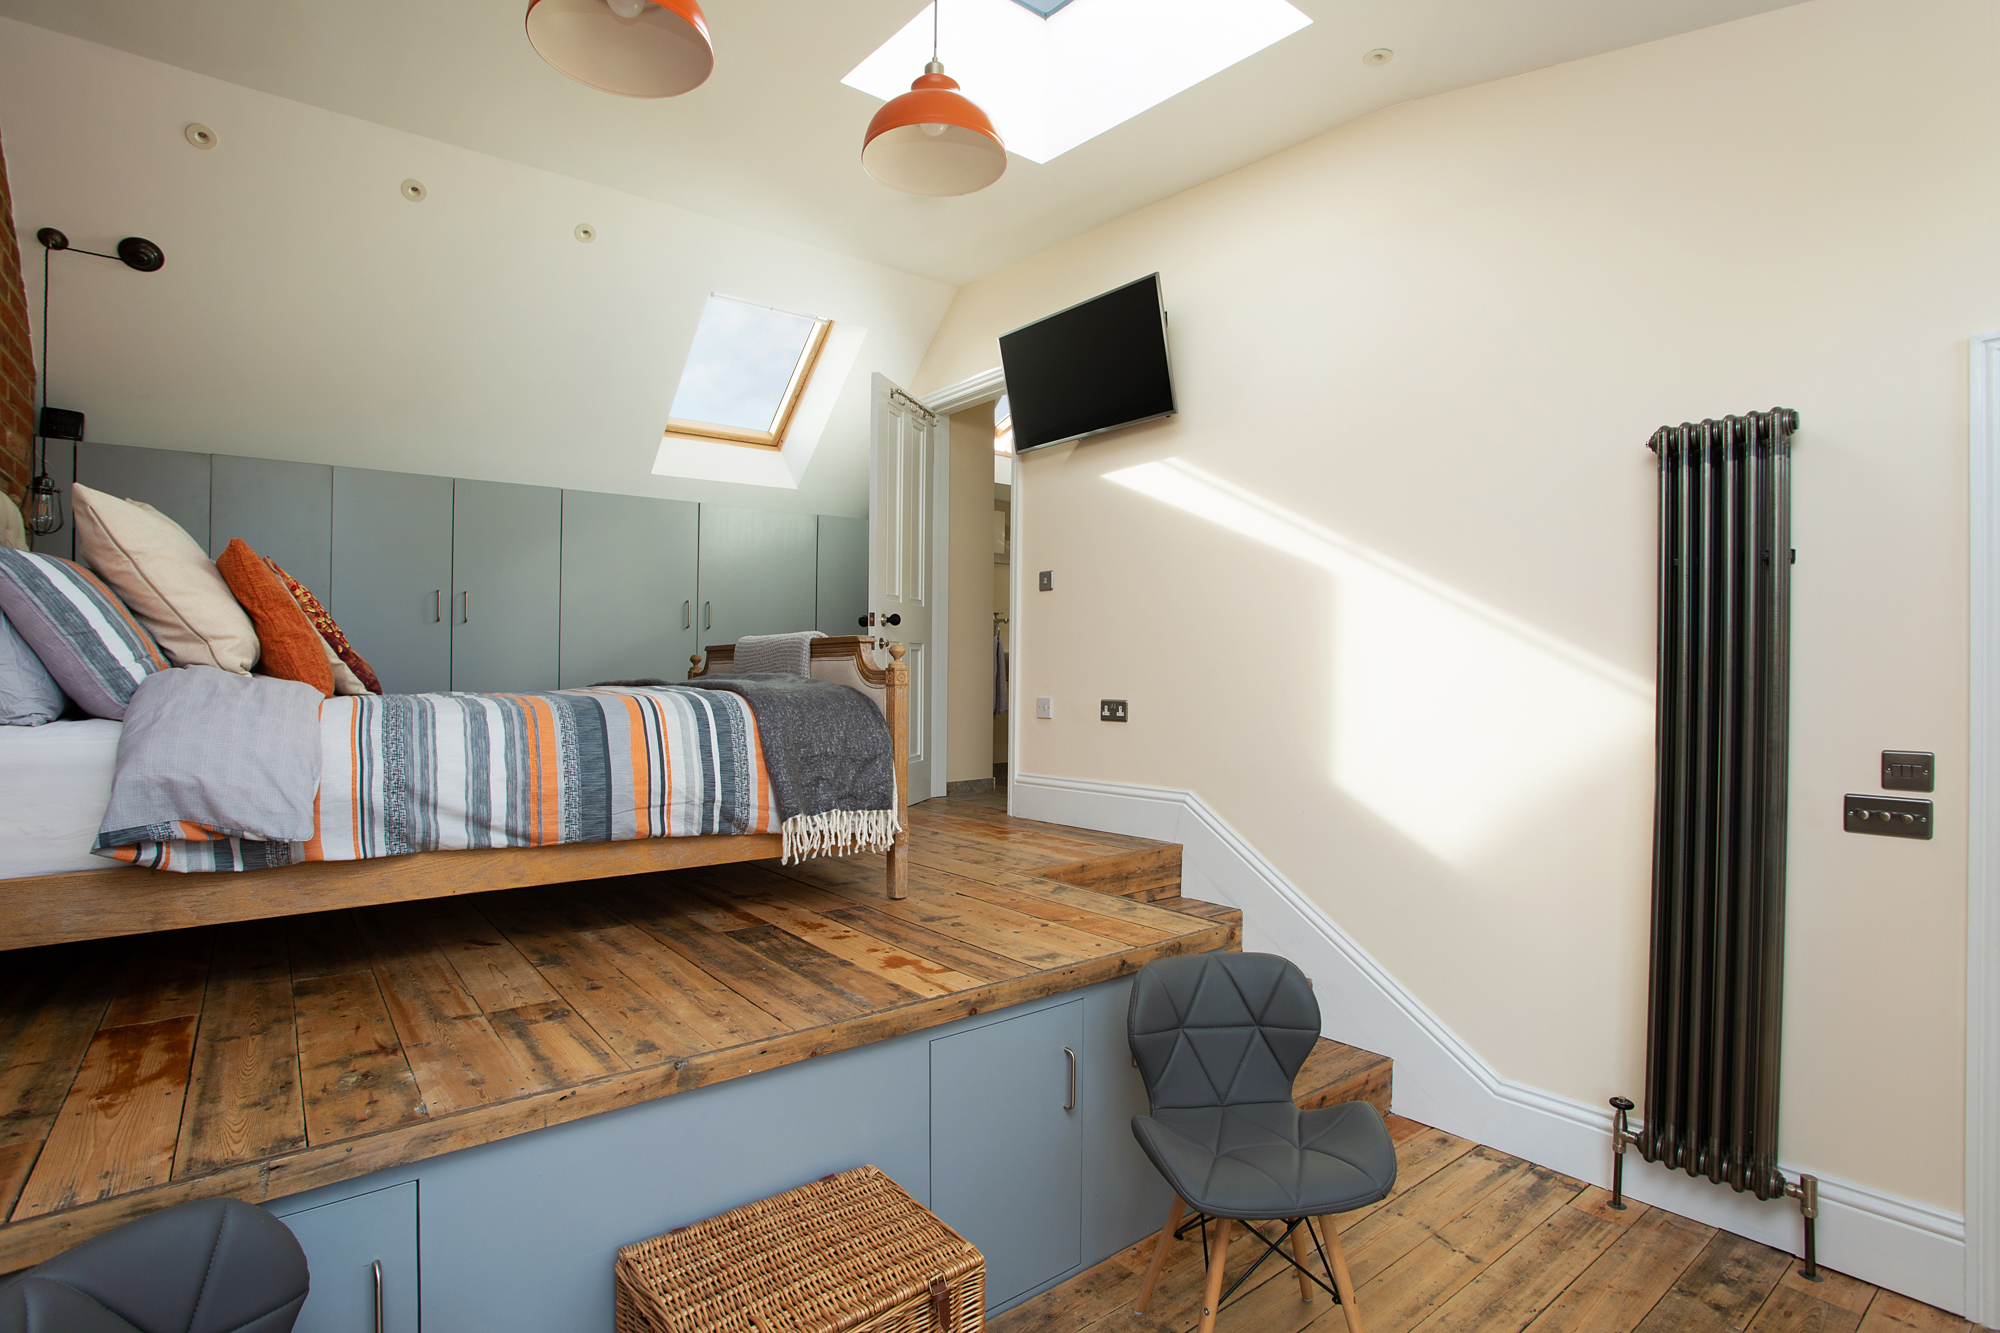 Loft Conversions The Go To Guide For, How Much Is It To Turn A Loft Into Bedroom